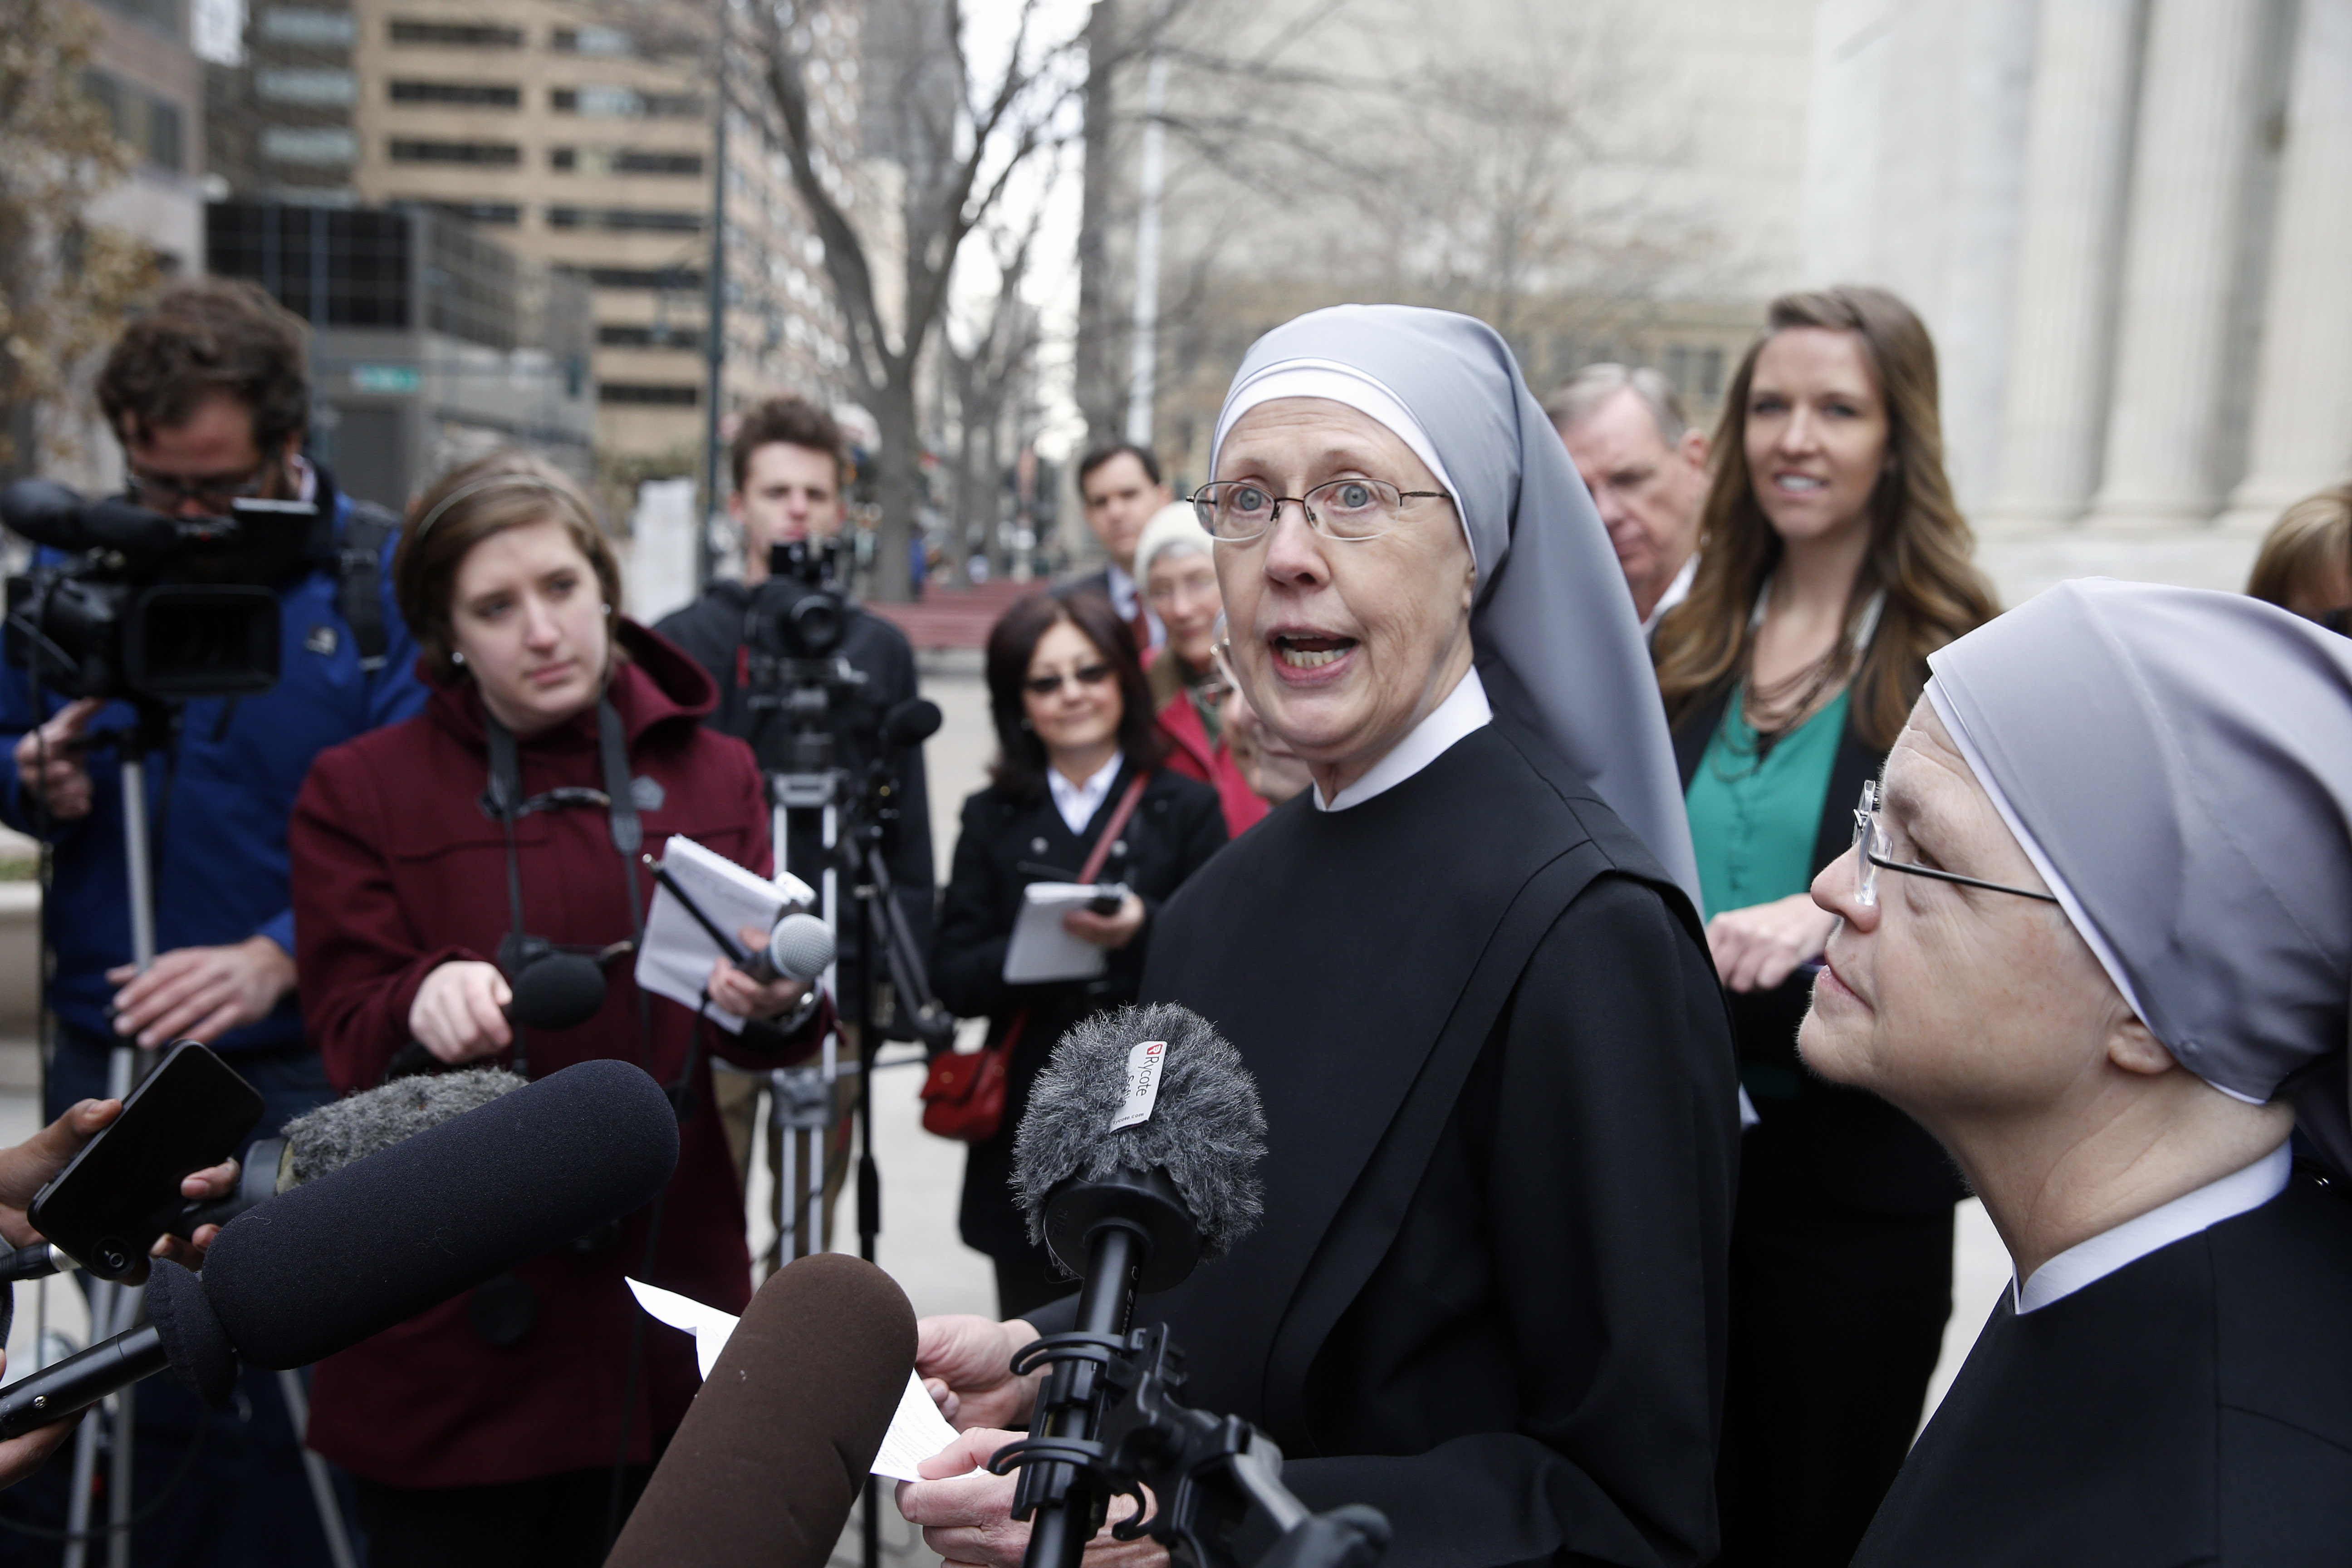 Sister Loraine Marie Maguire, of Little Sisters of the Poor, speaks to members of the media in 2014.